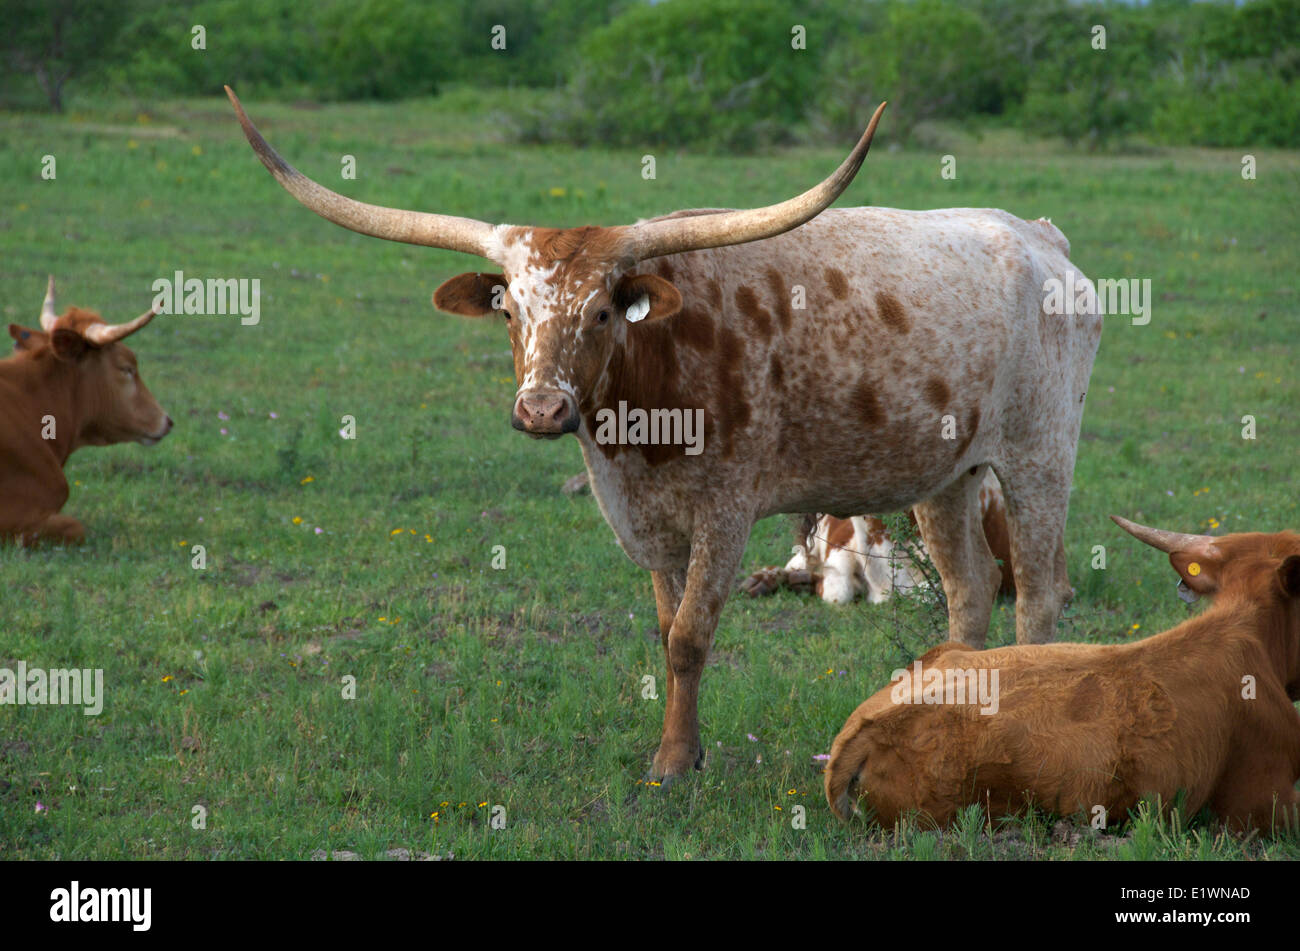 Texas Longhorn cattle in summer green field.  Oklahoma, North America. Stock Photo